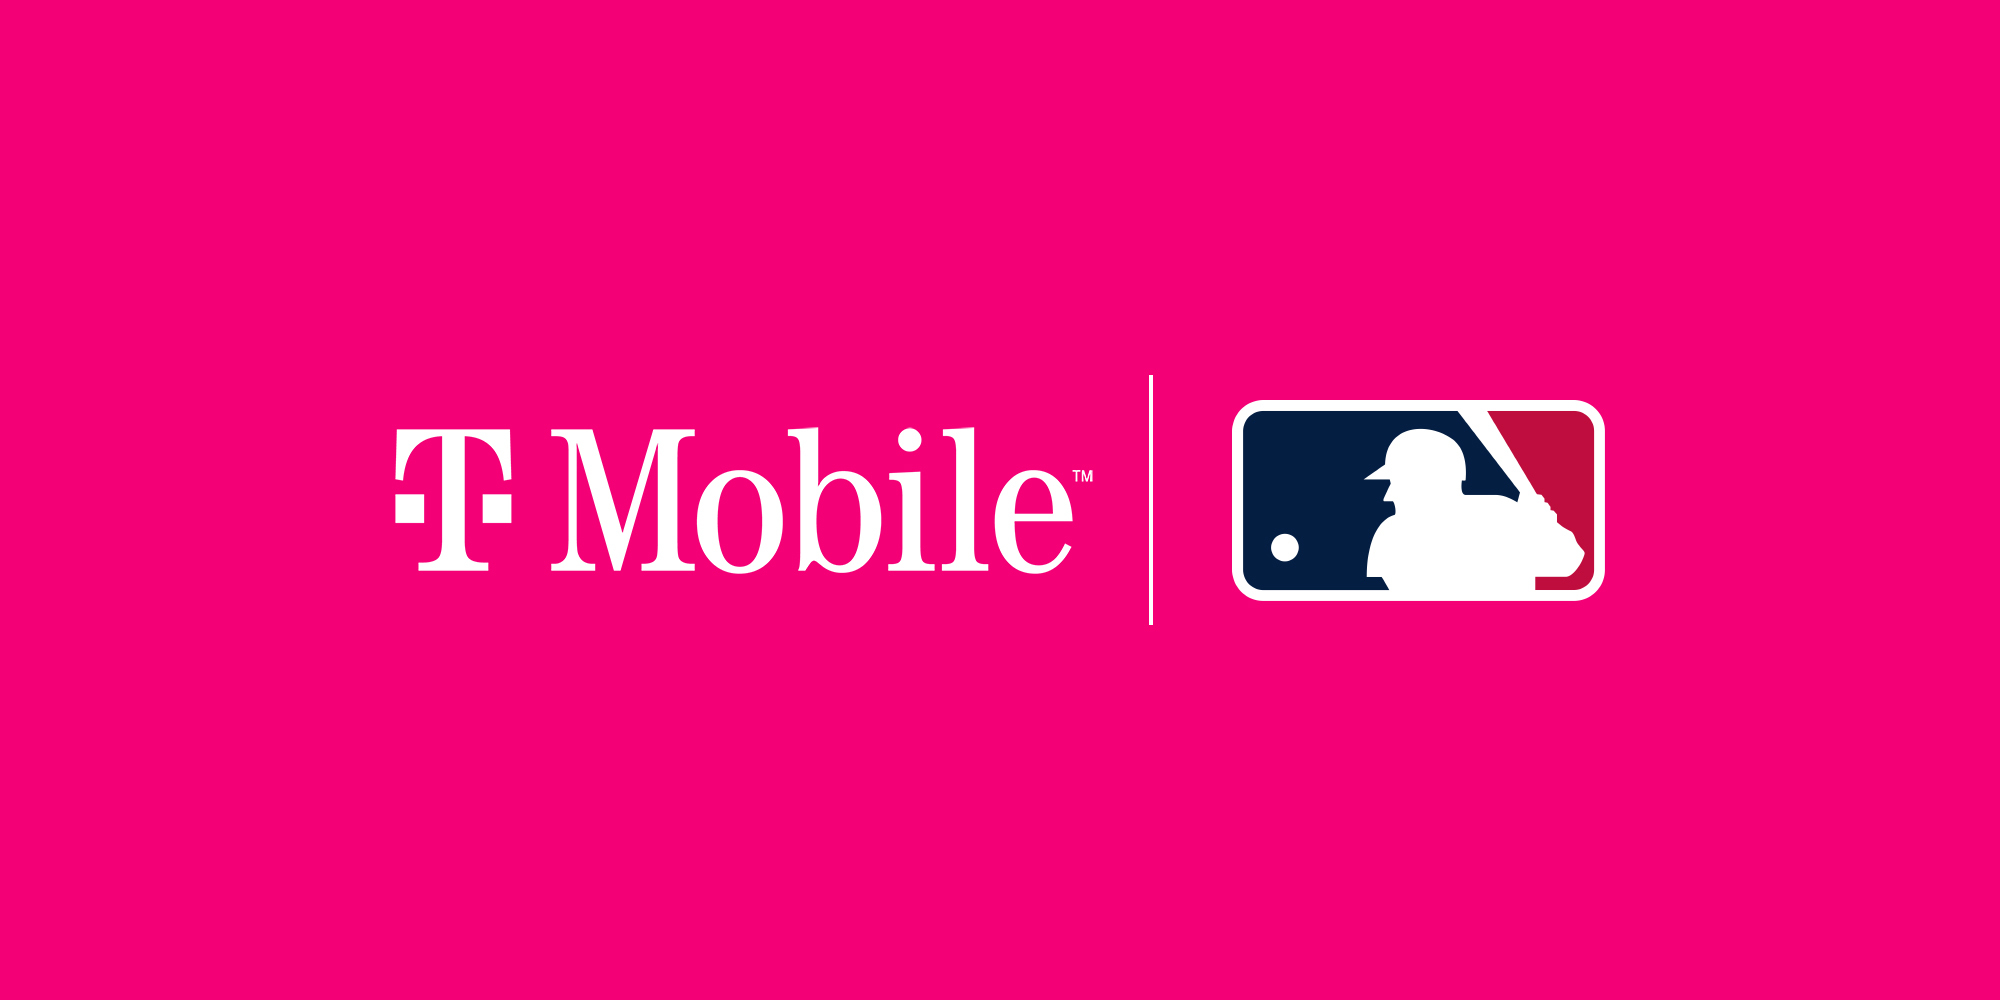 TMobile says free MLBTV offer will be available as soon as baseball is  back  TmoNews